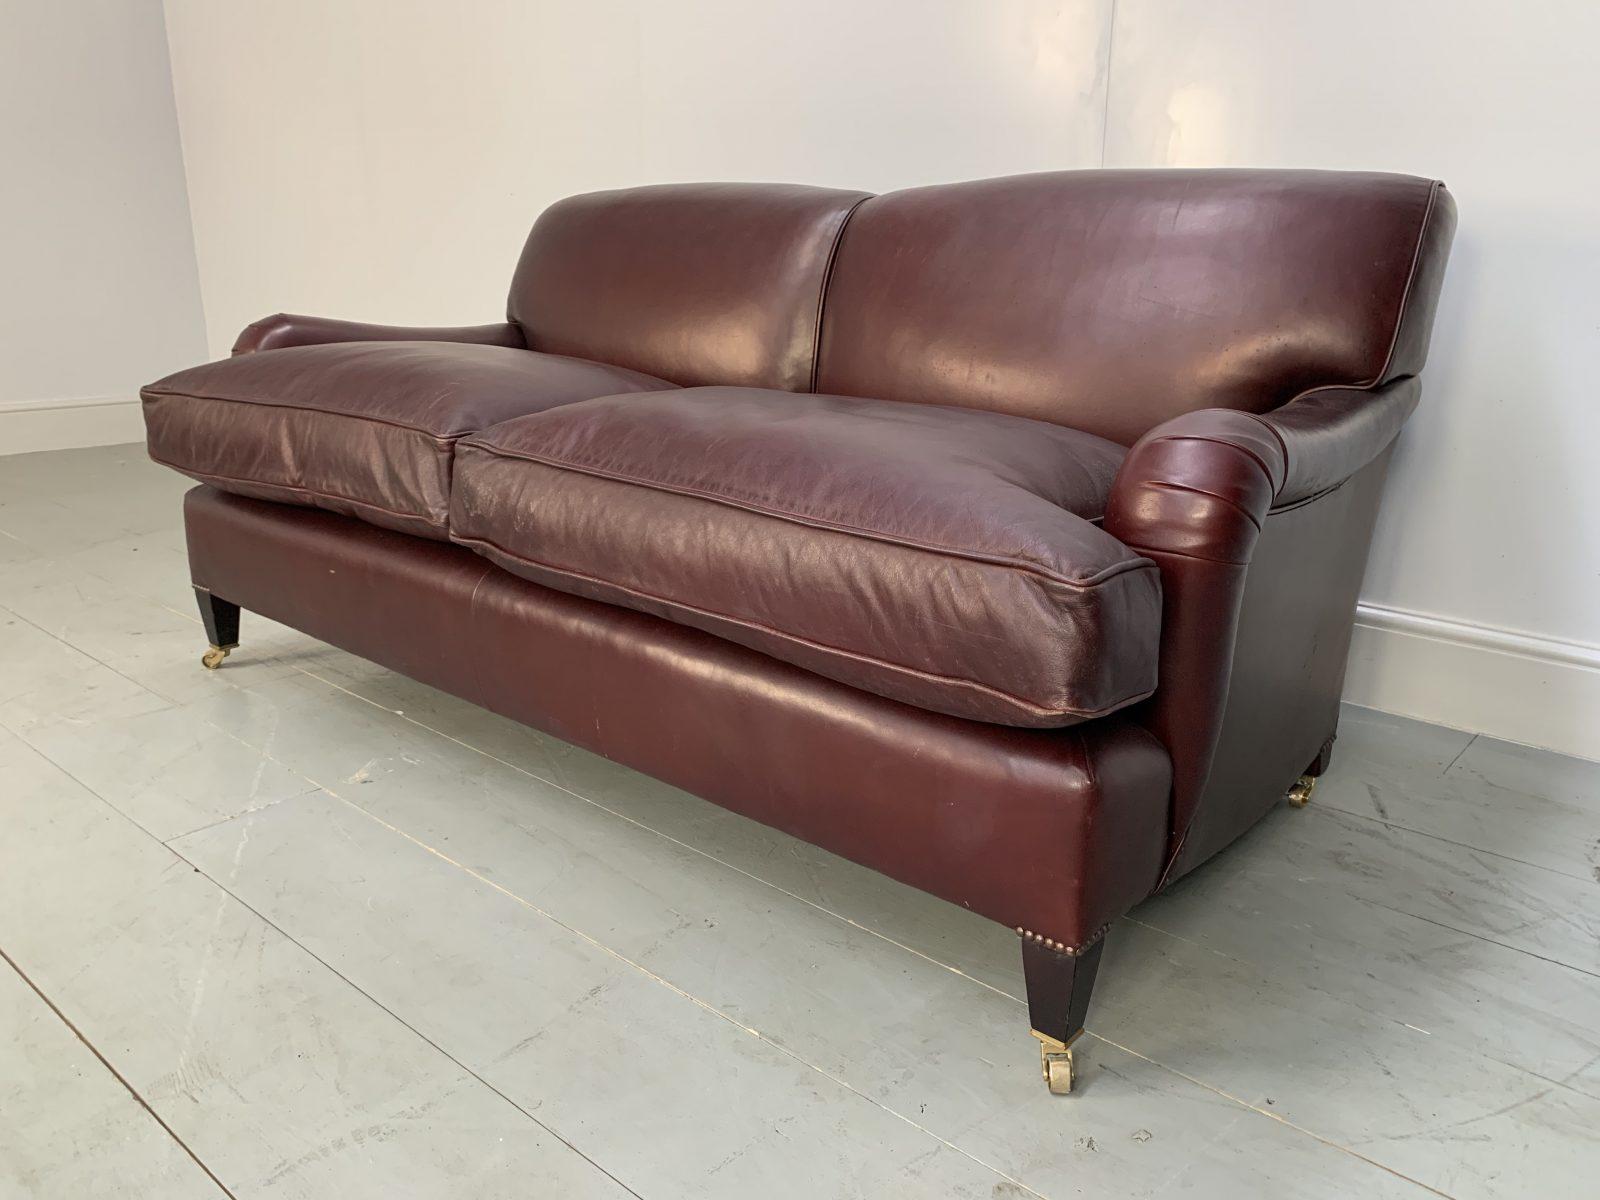 George Smith Leather Sofa – Signature “Standard-Arm” – Large 2.5-Seat Sofa in Ox For Sale 5